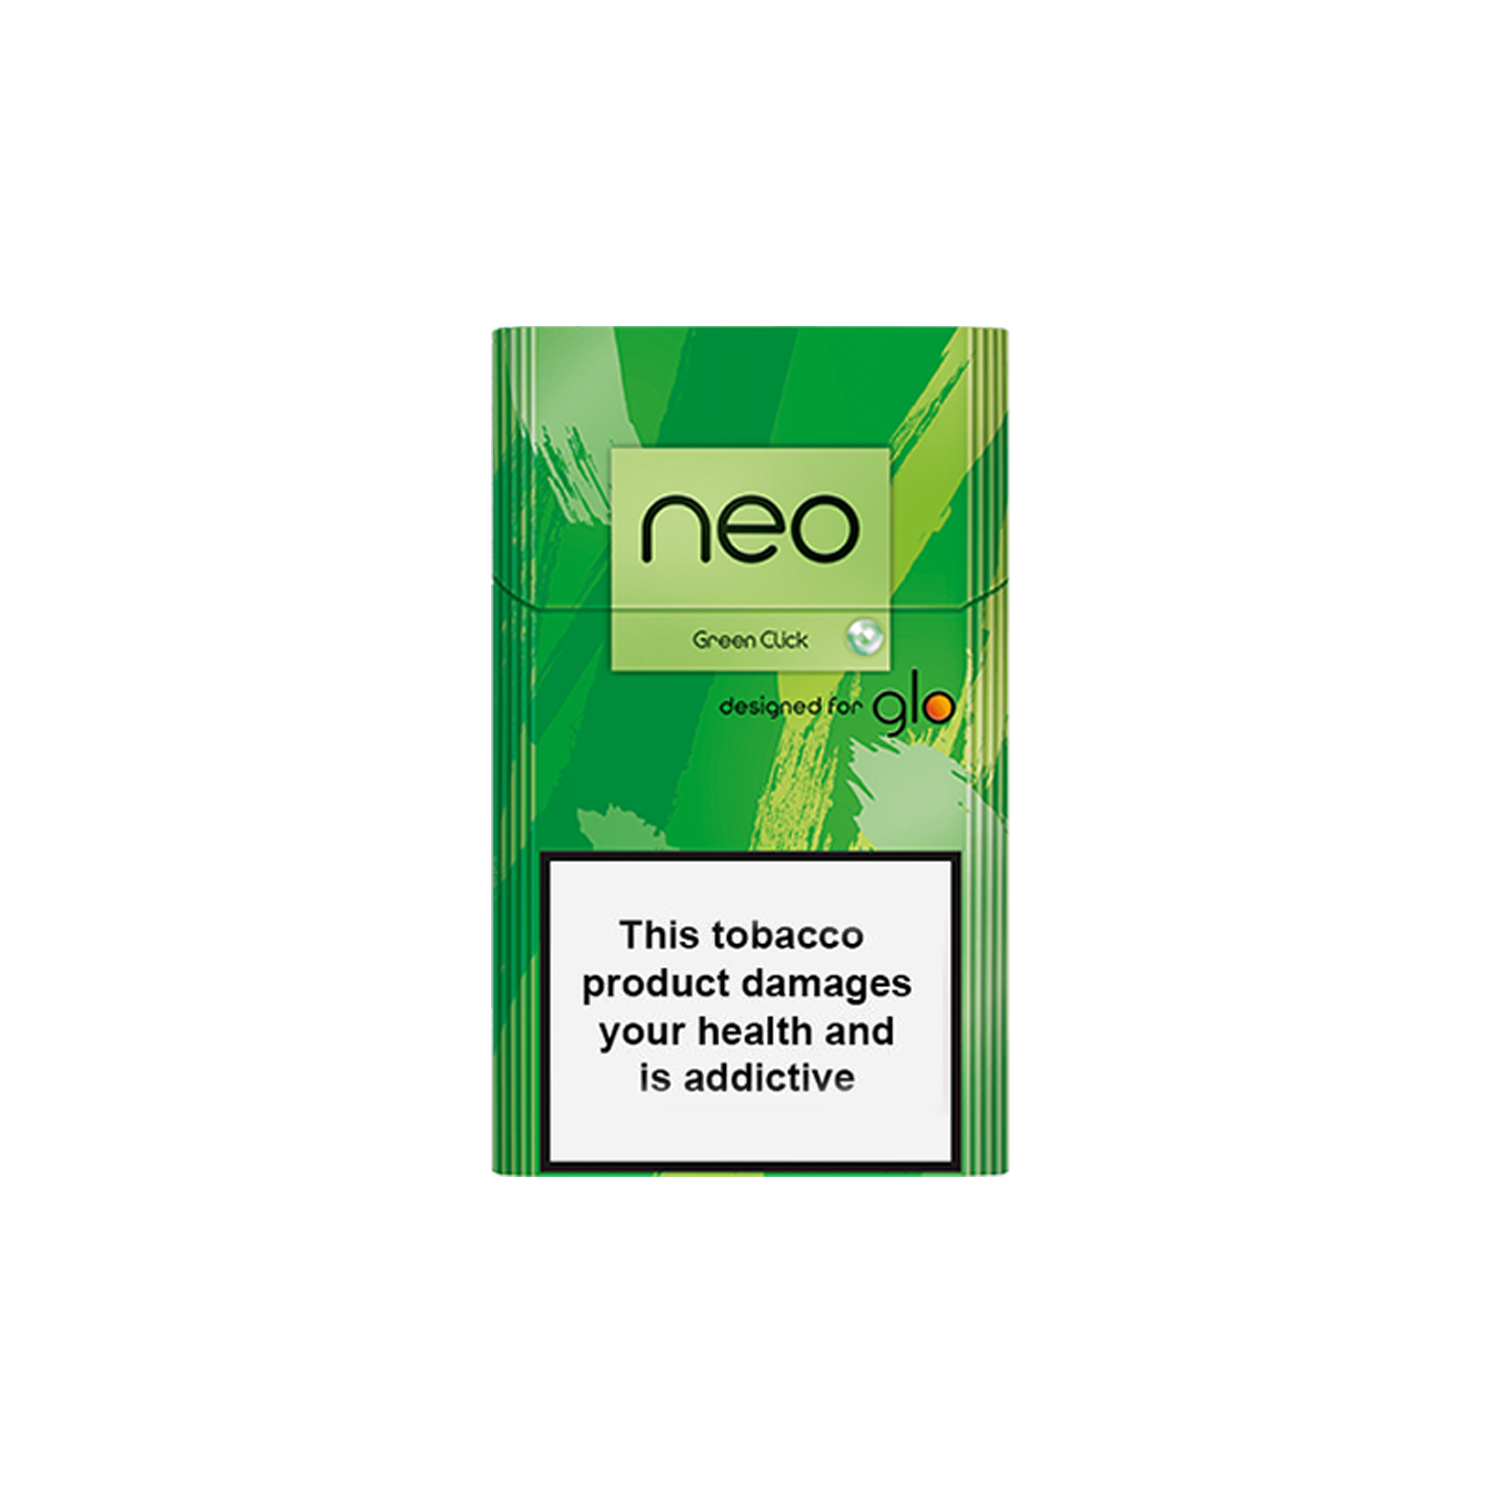 NEO Sticks Green Click for GLO - Buy online